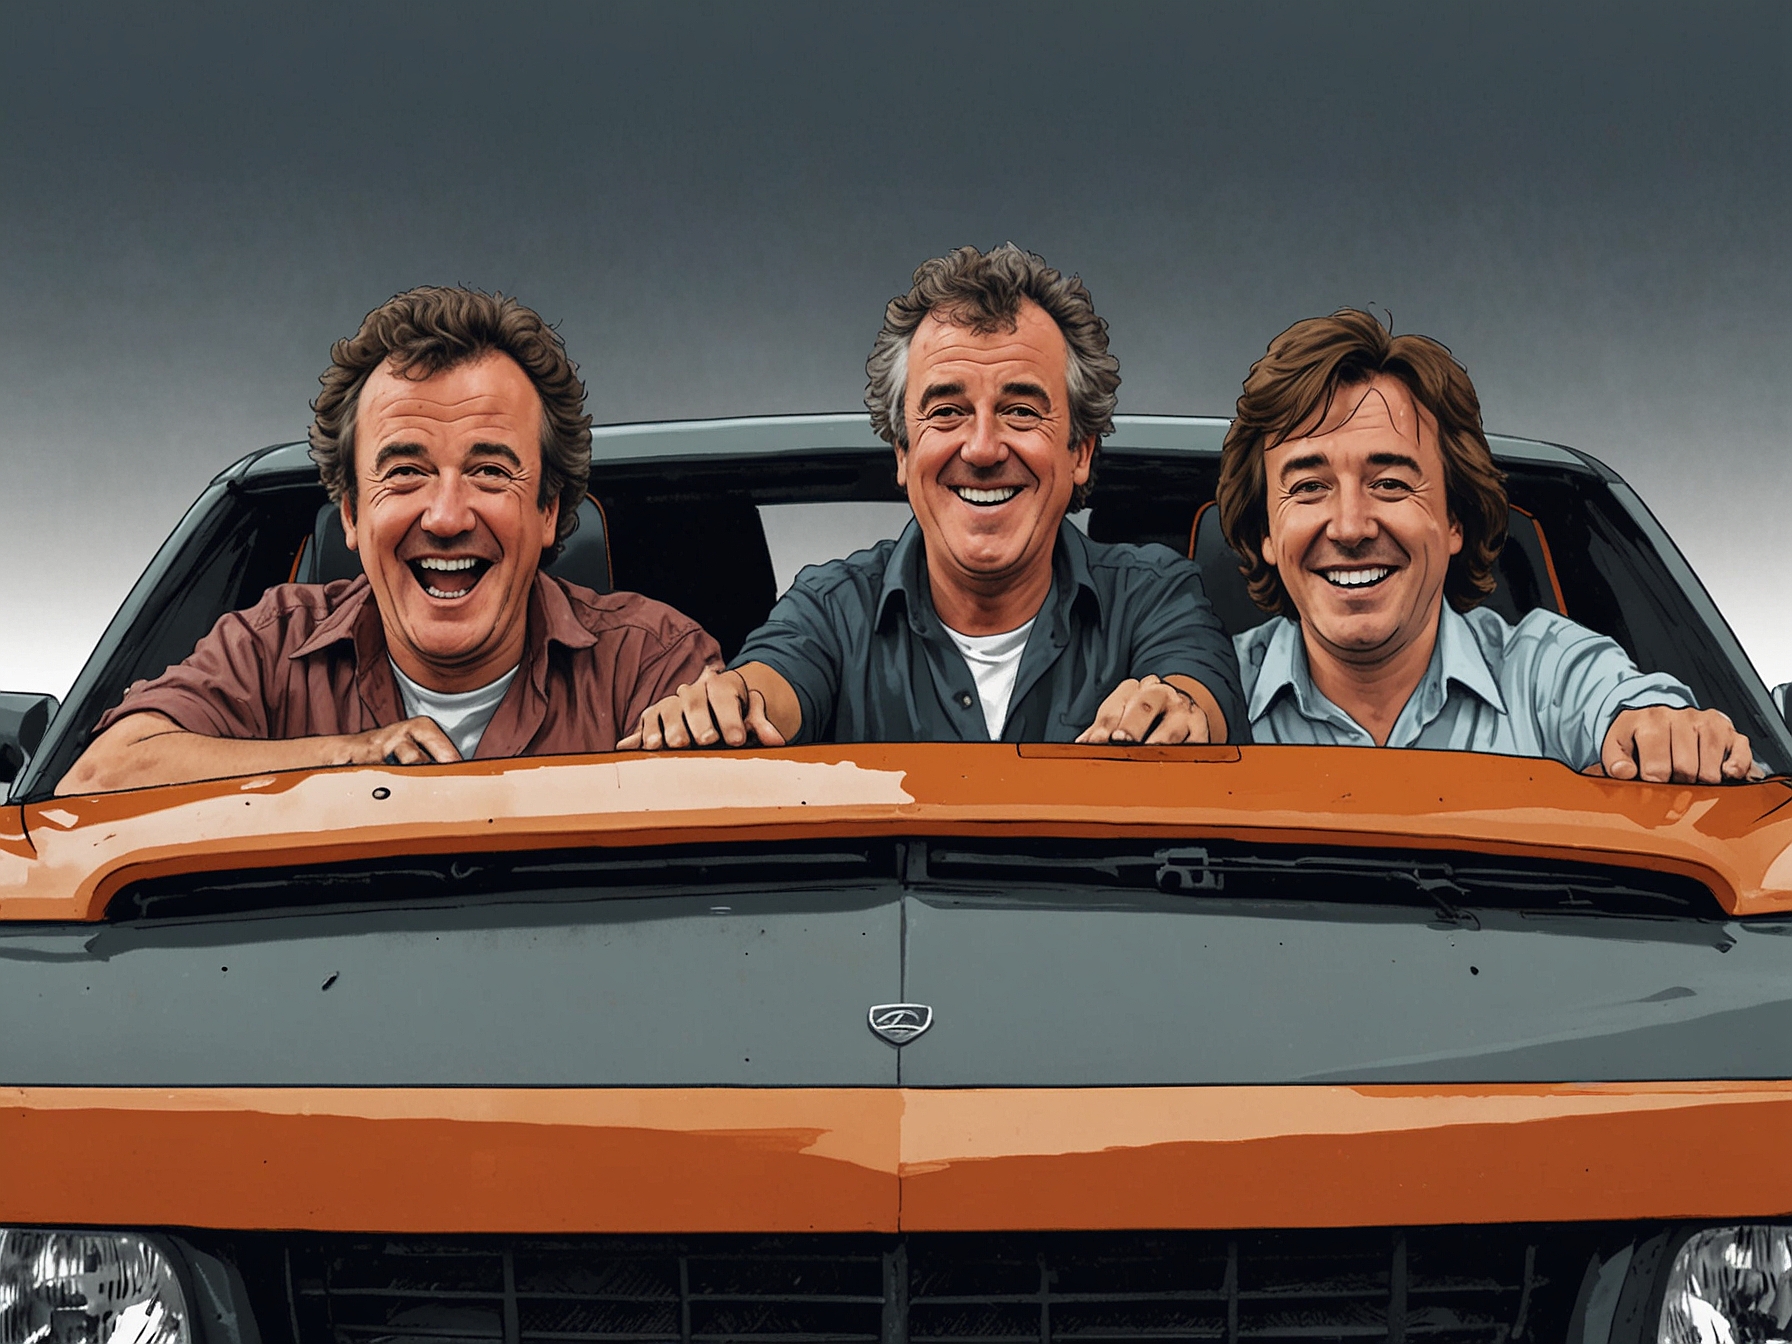 Jeremy Clarkson, Richard Hammond, and James May are seen laughing and discussing beside a high-performance car during one of their thrilling adventures on The Grand Tour.